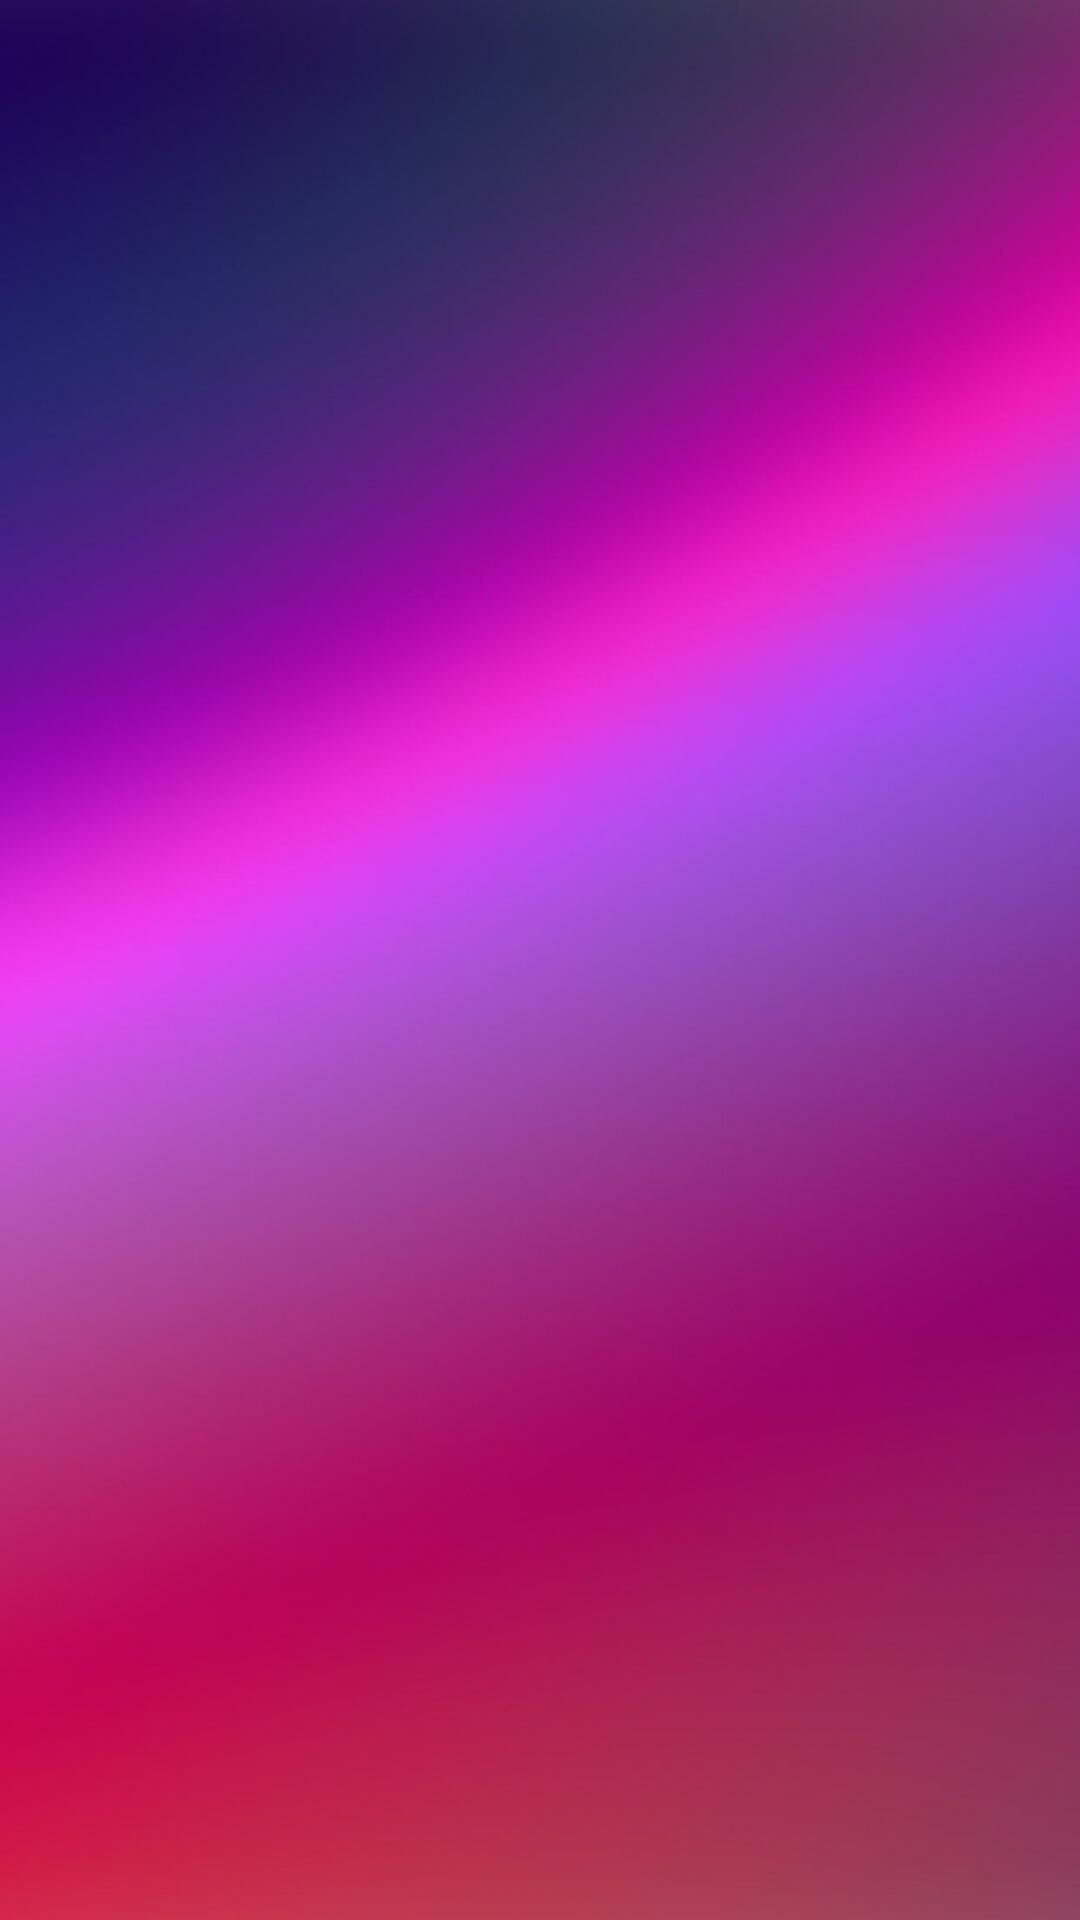 Red hot pink blur gradation Download Free HD Wallpaper for iPhone 6 (2022)